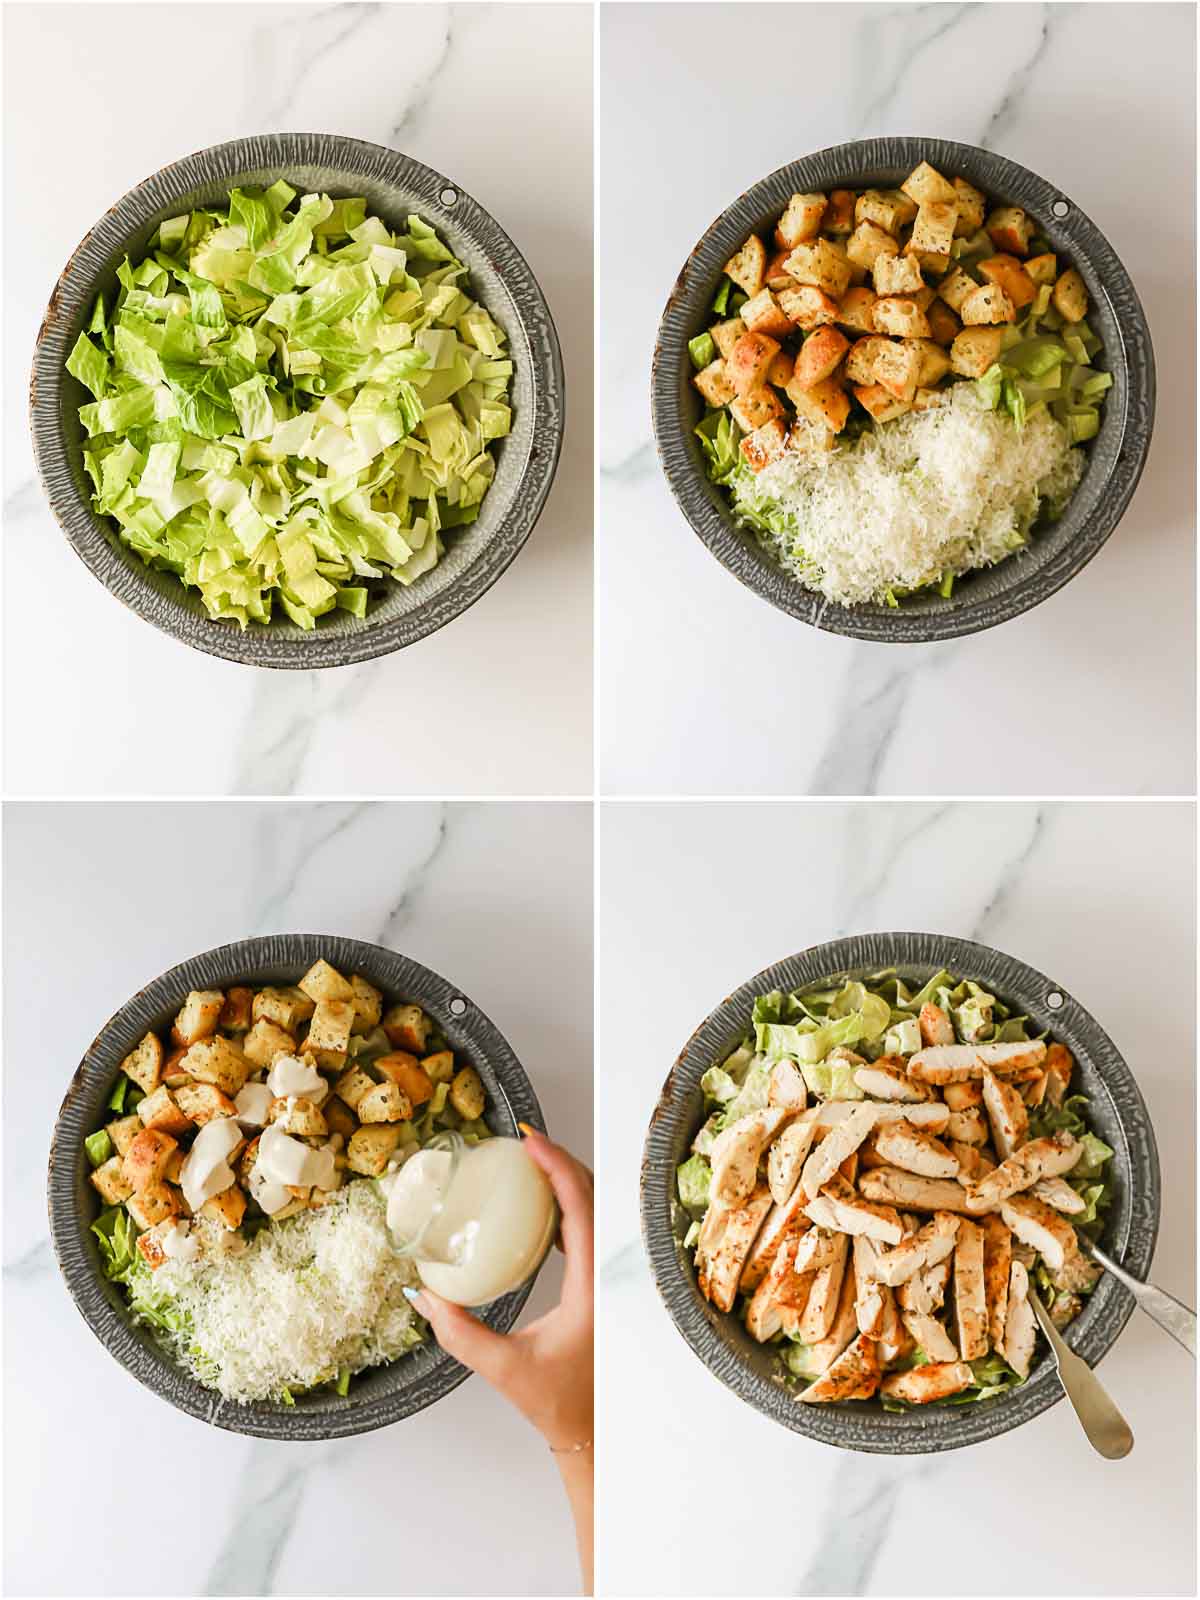 Four images showing the process of assembling a chicken Caesar salad recipe.